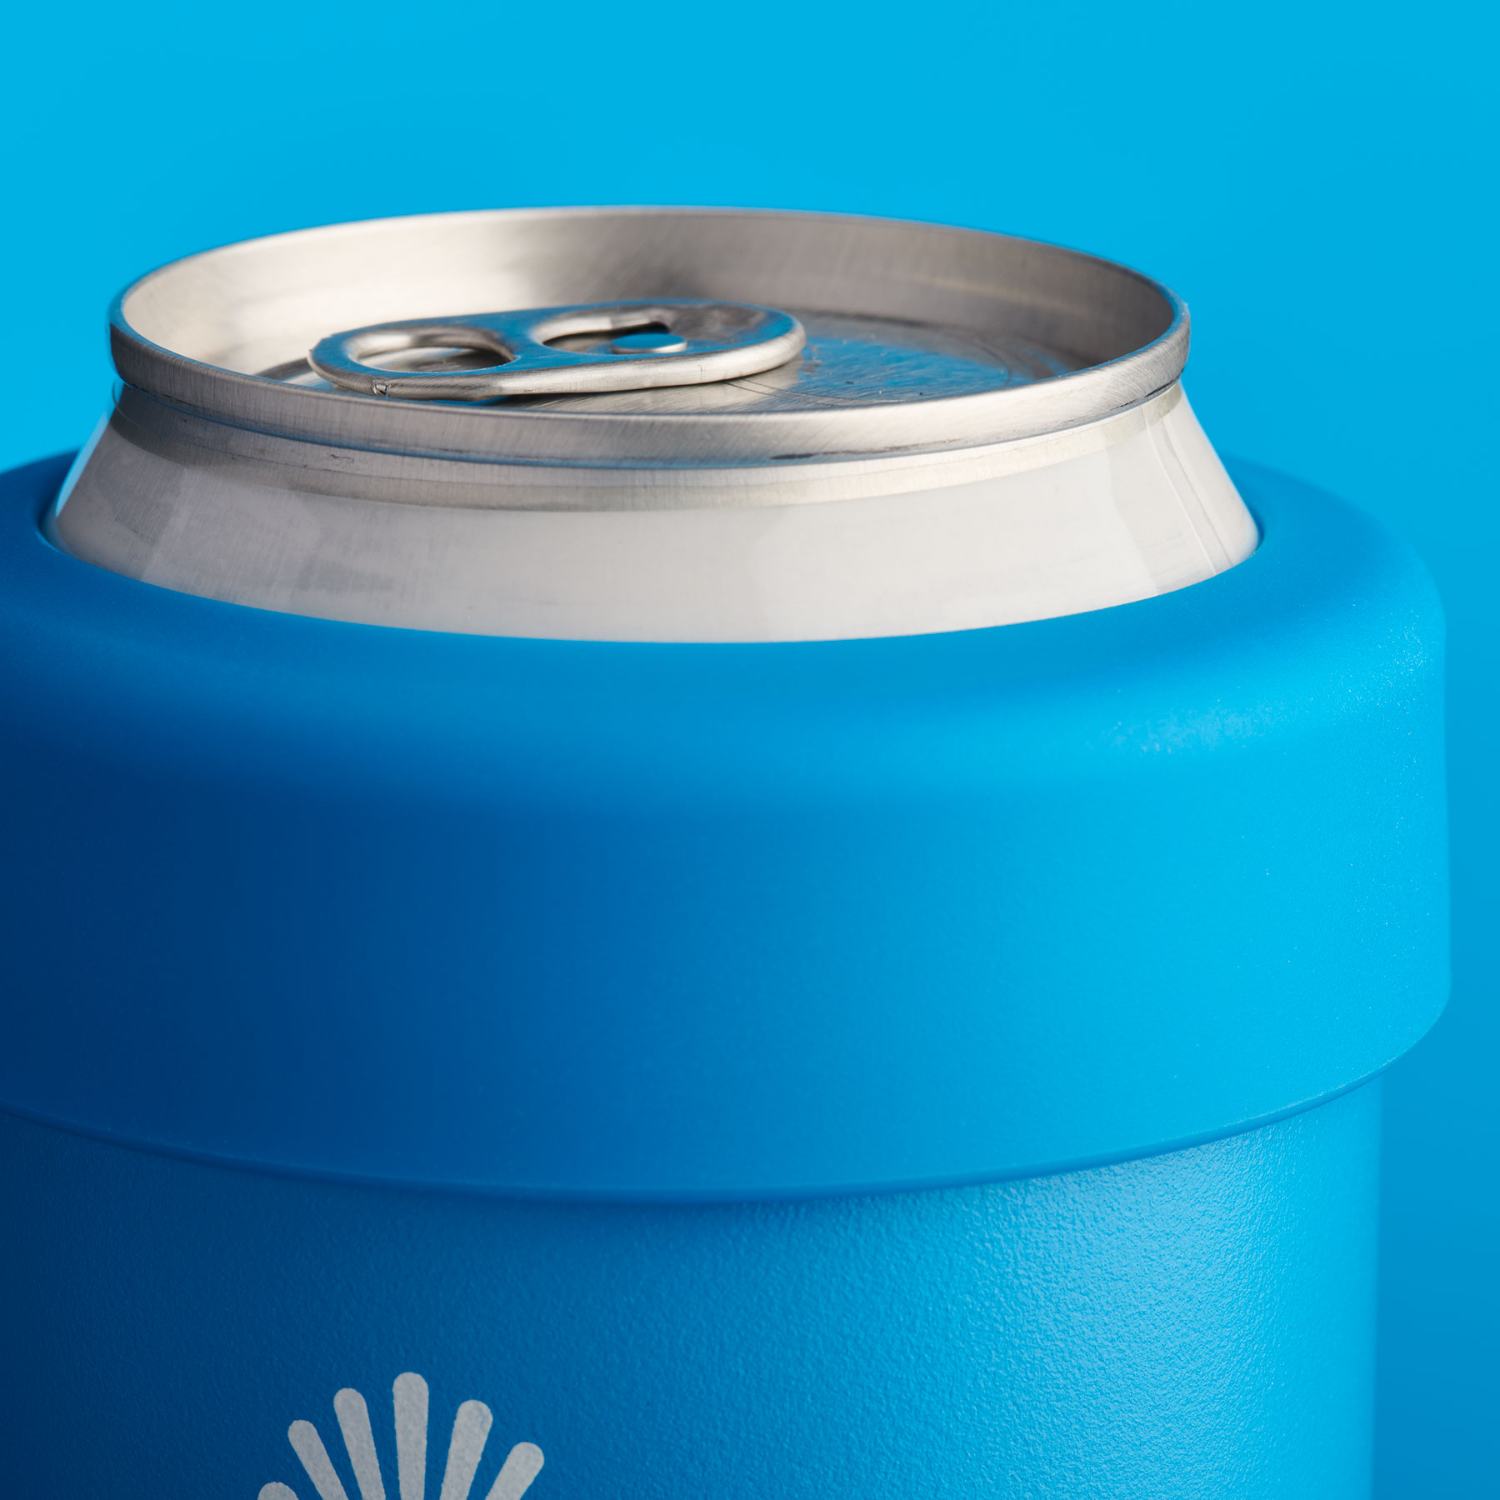 Hydro Flask Cooler Cup 355ml